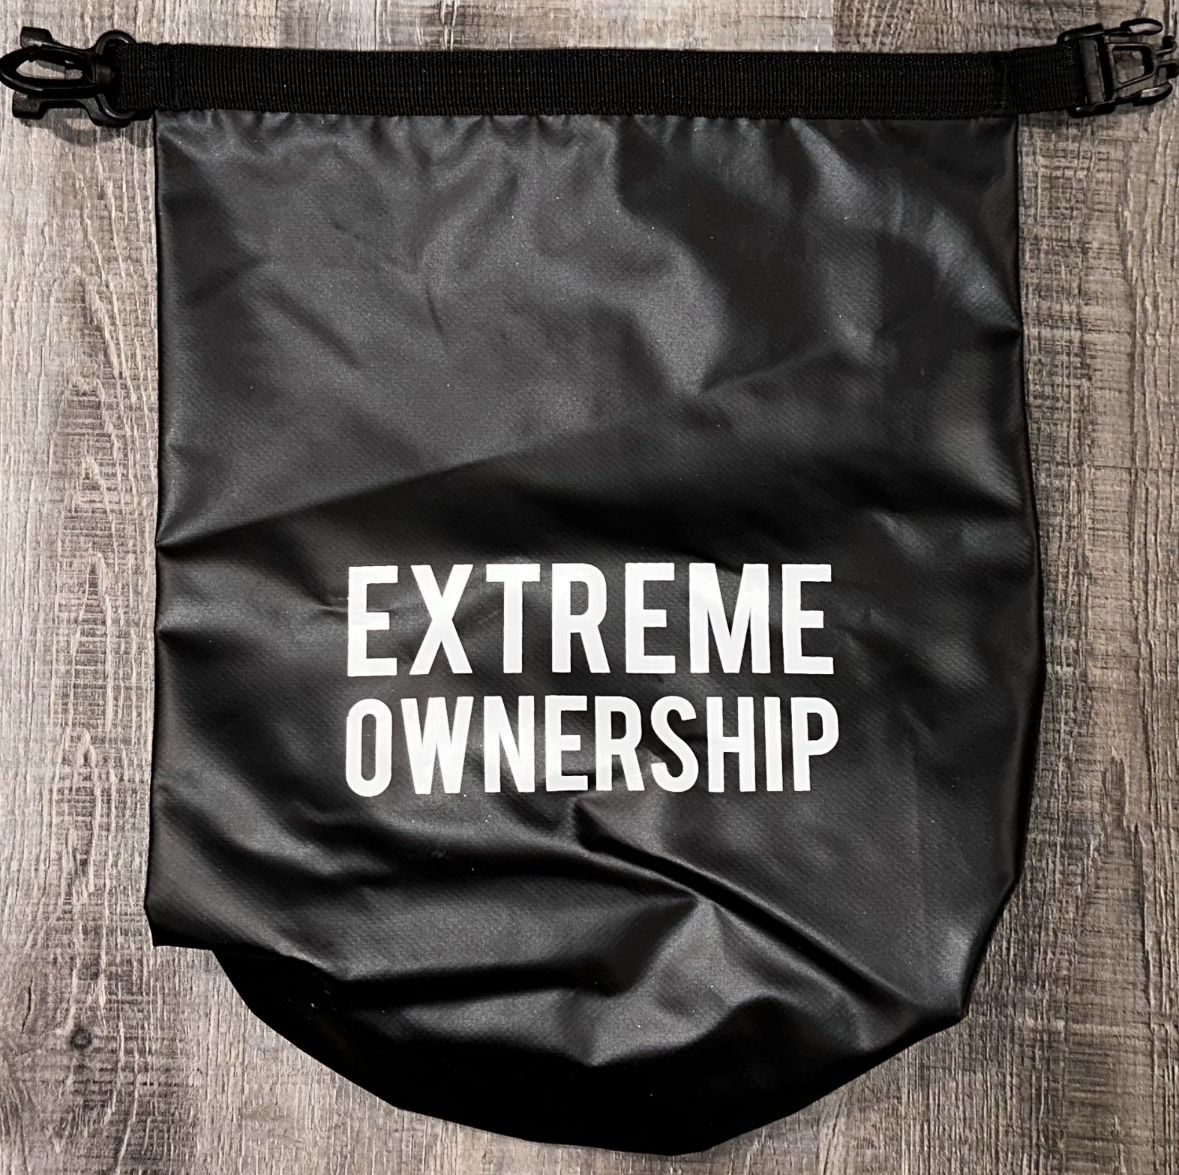 New Jocko’s Echelon Front Extreme Ownership Dry Bag